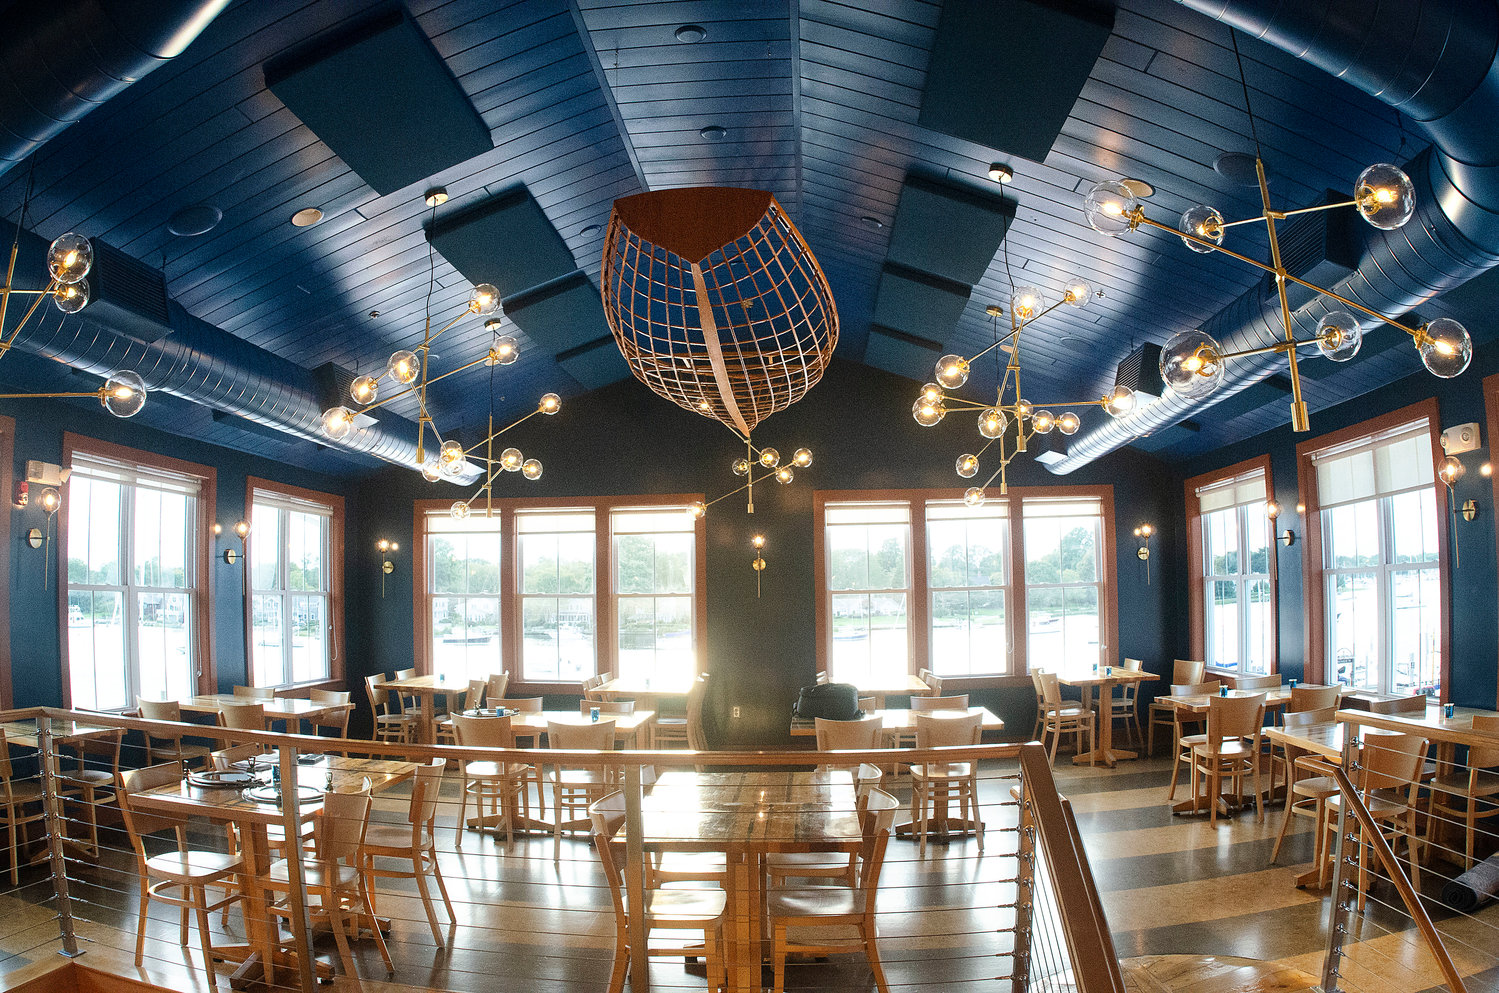 The new upstairs dining area features a warm color palette and lots of handcrafted wood accents.